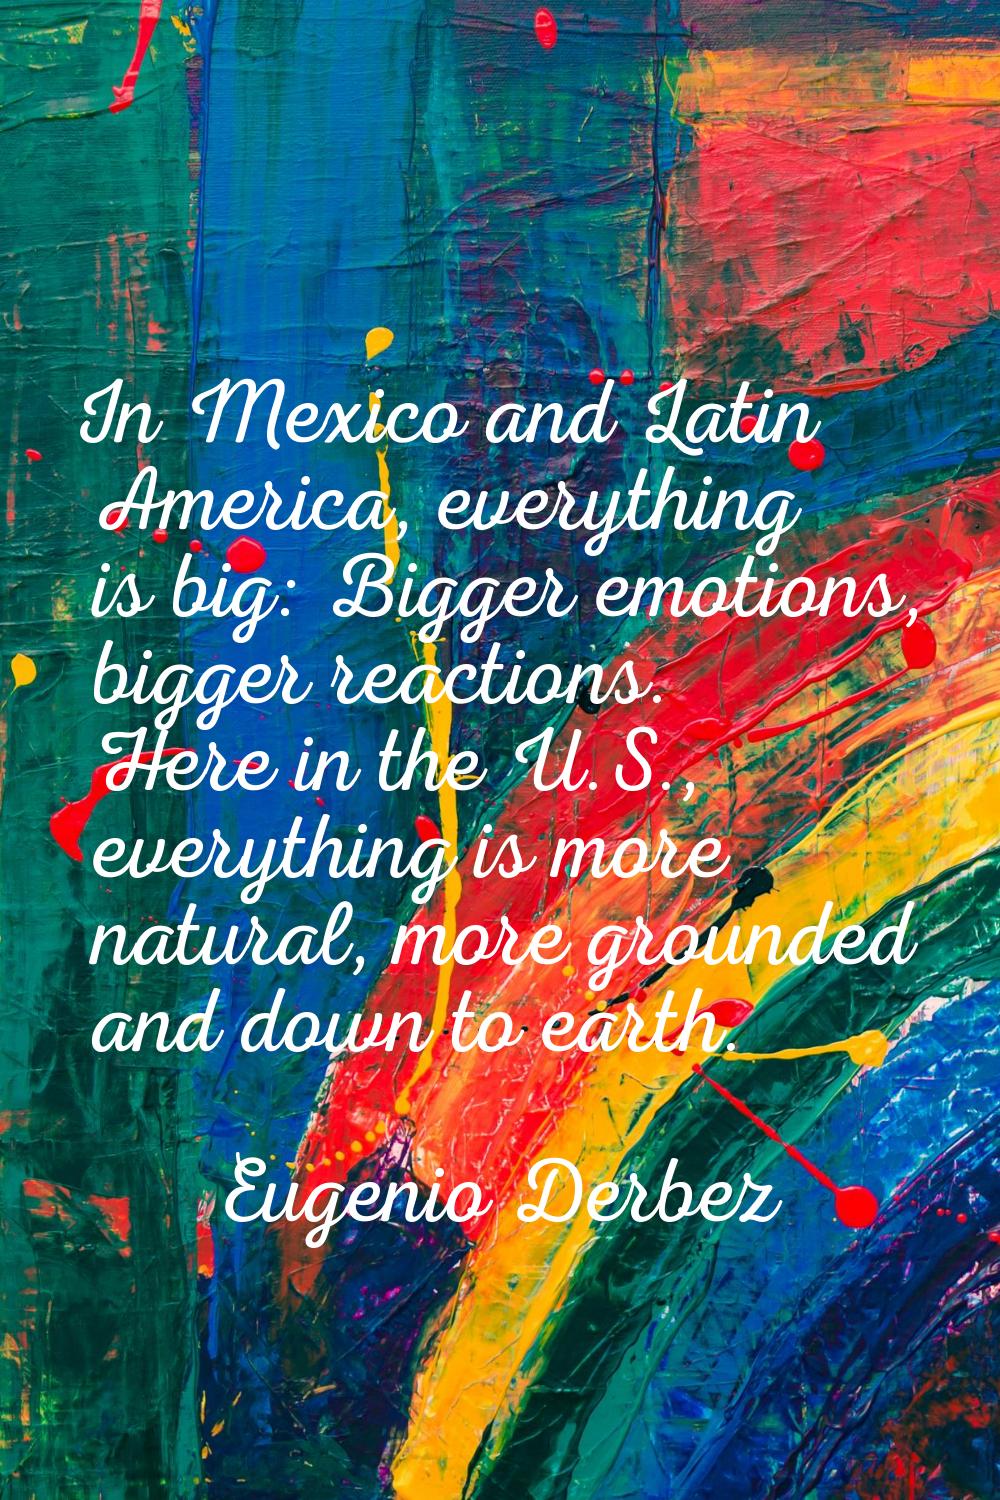 In Mexico and Latin America, everything is big: Bigger emotions, bigger reactions. Here in the U.S.